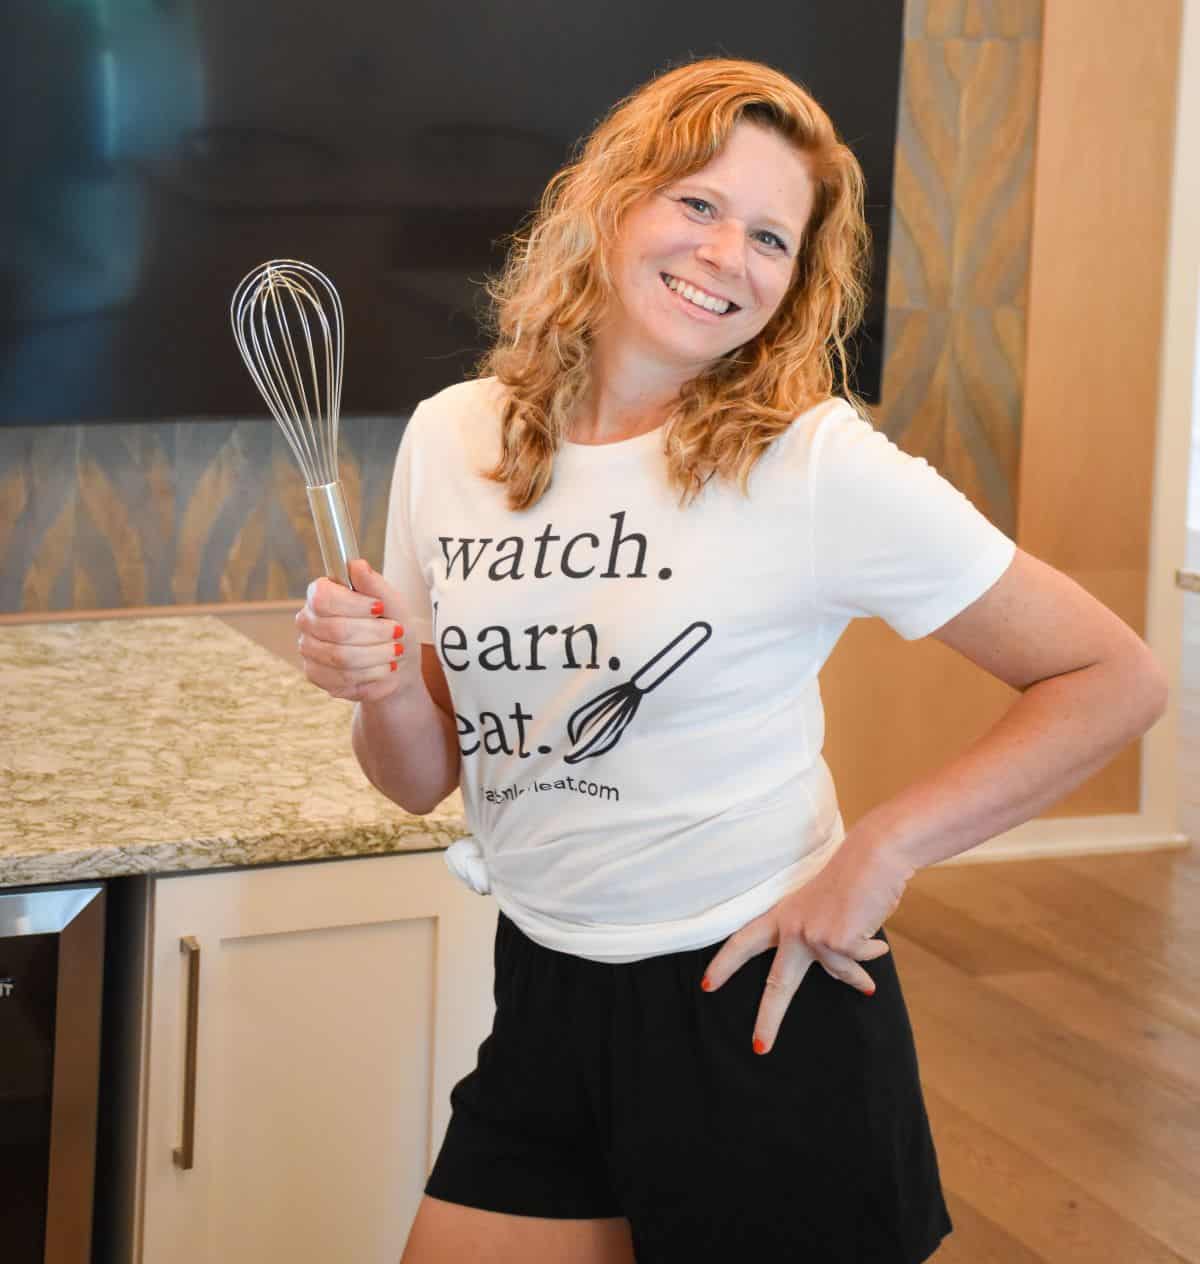 close-up of blog author standing in kitchen holding a whisk.